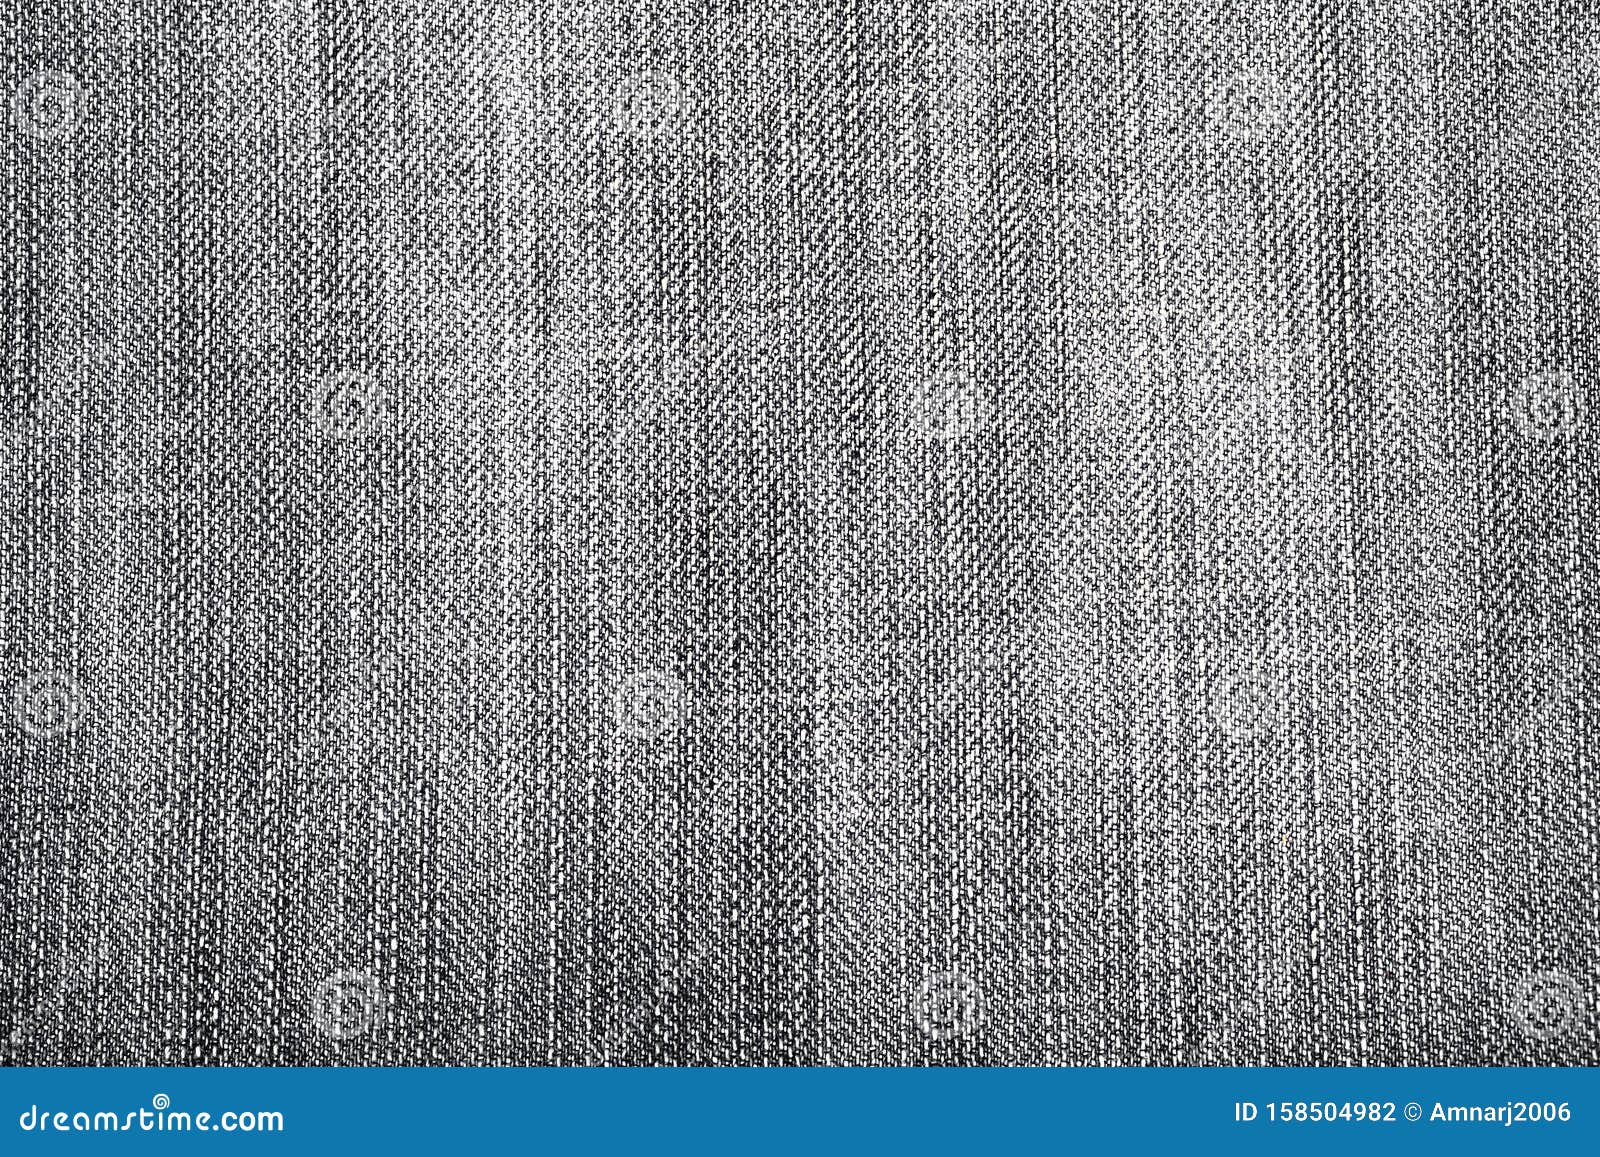 Texture of Denim Jeans Fabric Stock Photo - Image of garment, cloth ...